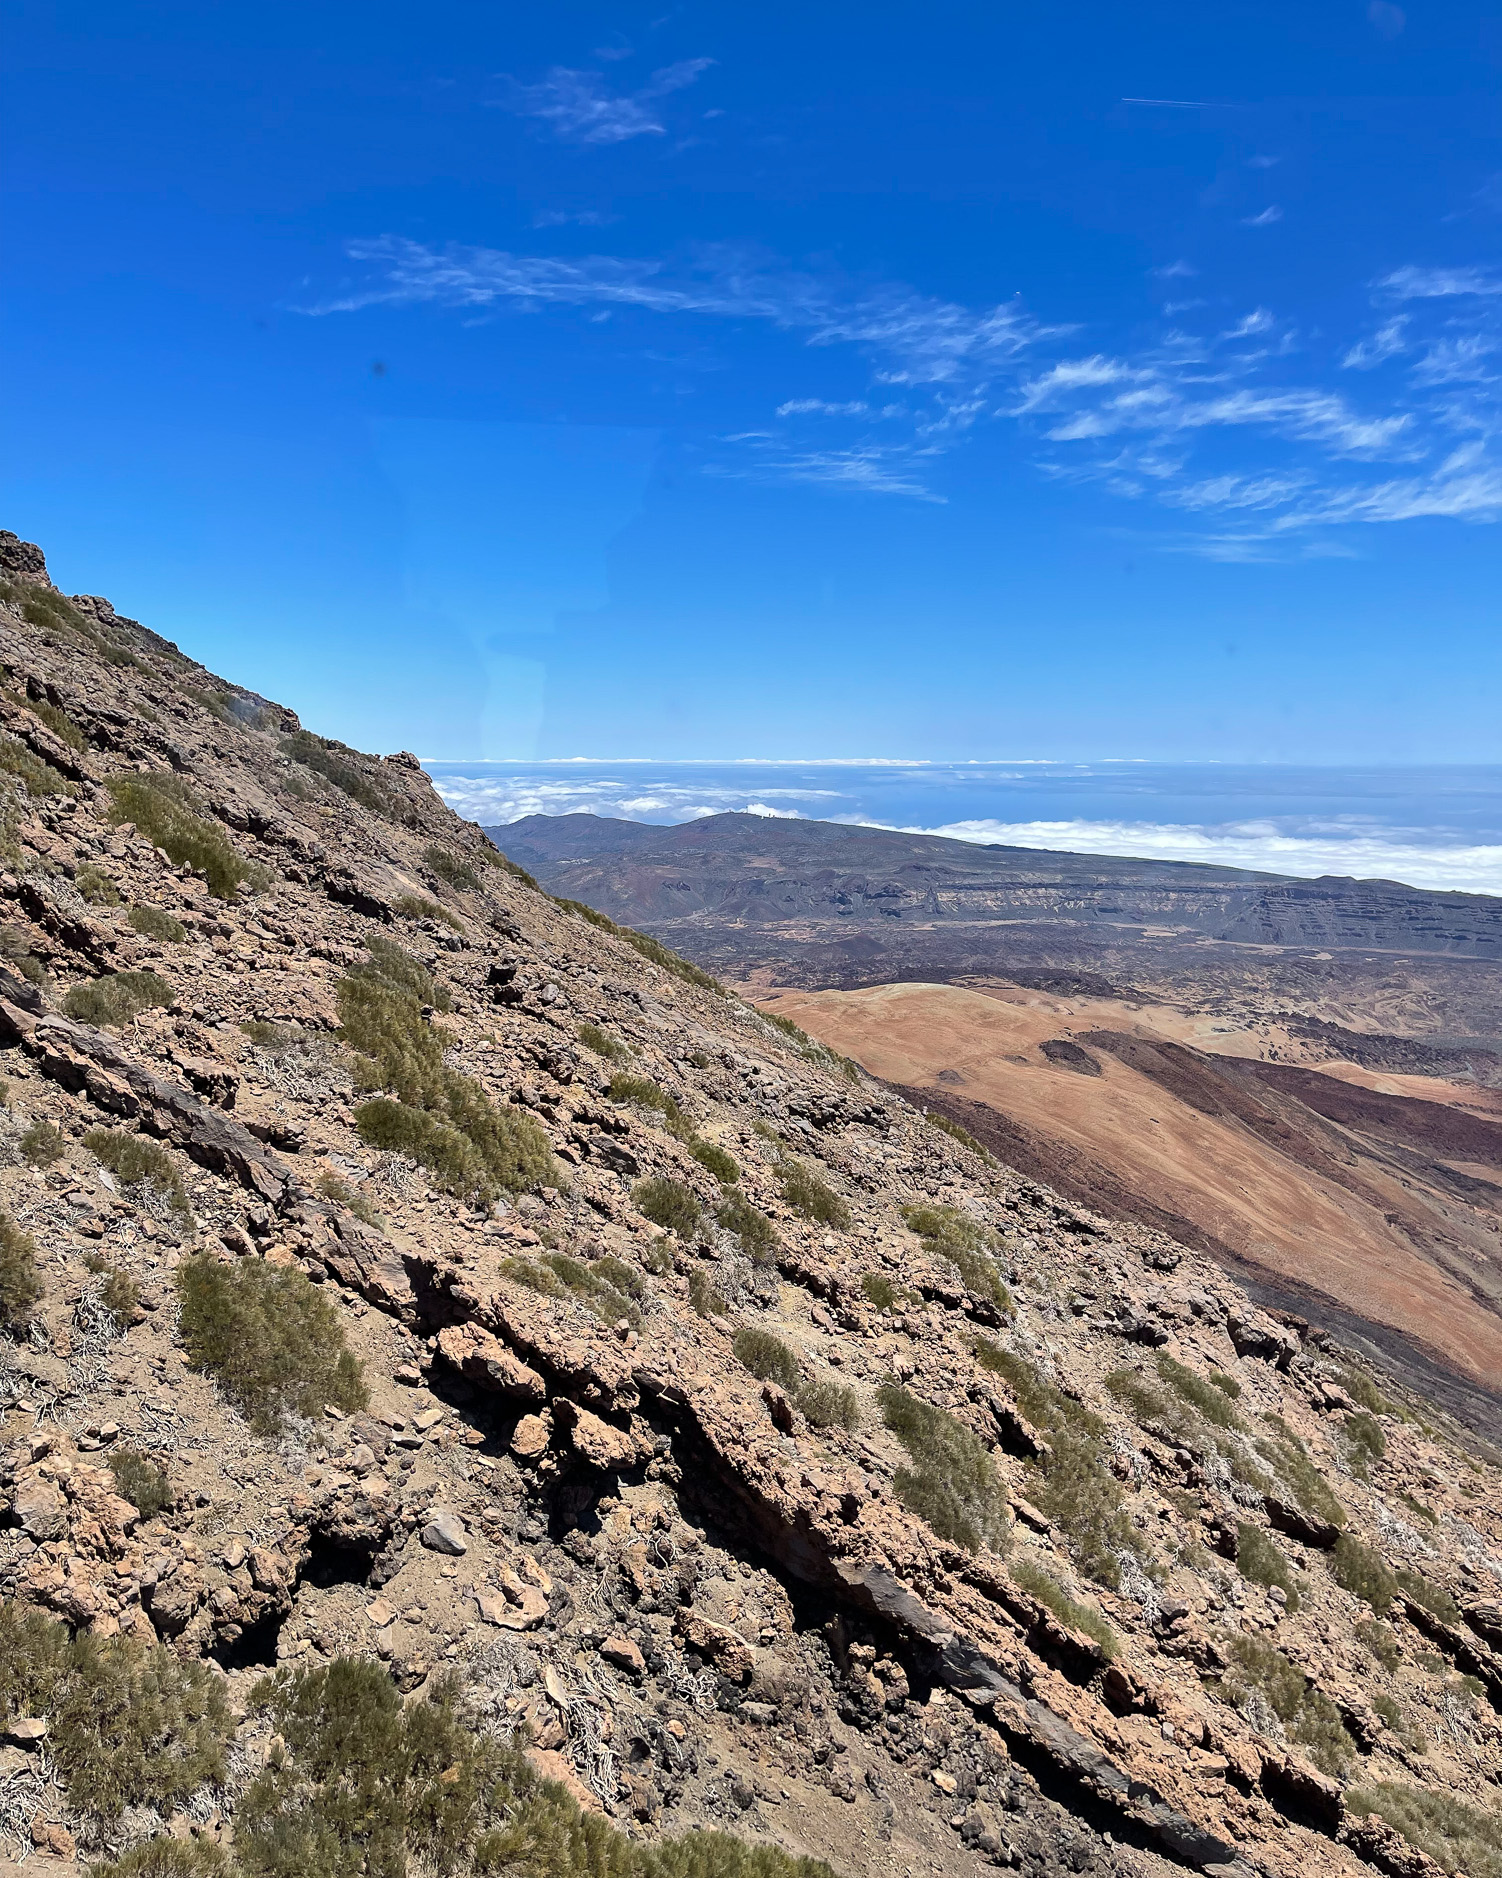 View from the cable car Teide National Park Tenerife Photo Heatheronhertravels.com